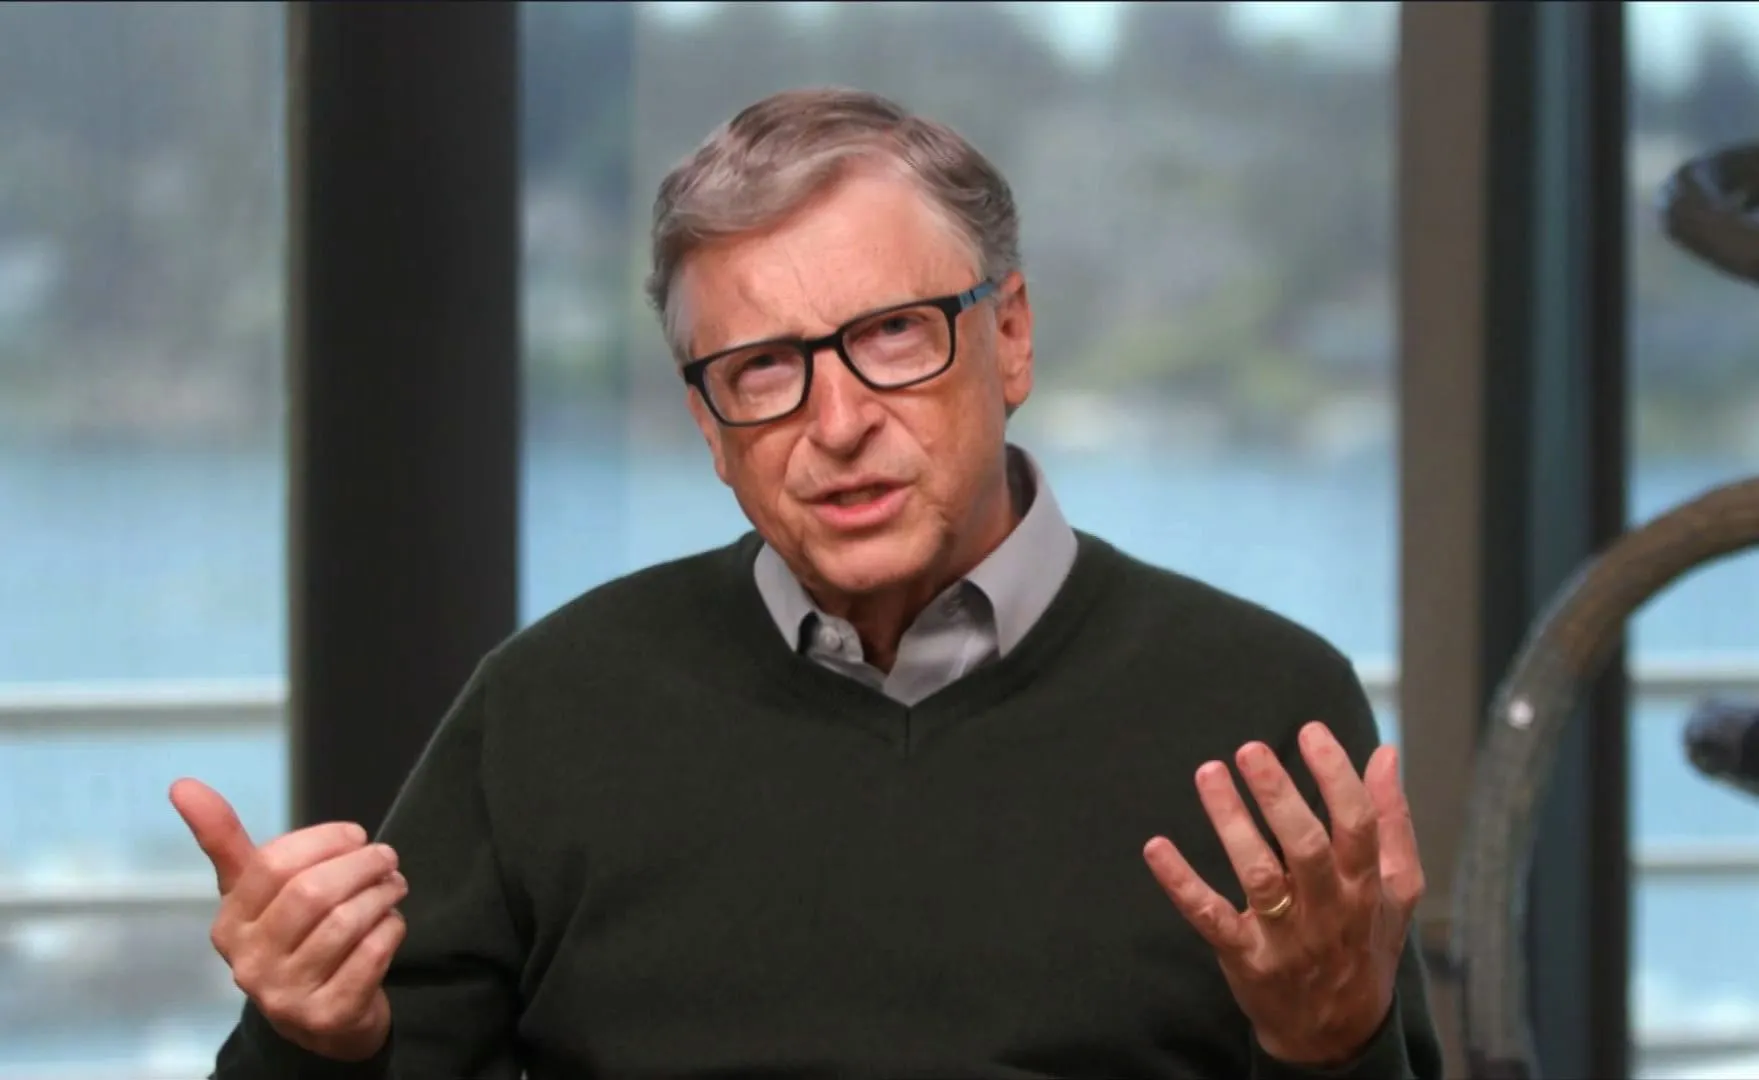 Bill Gates was 'very surprised' by 'crazy' Covid conspiracy theories